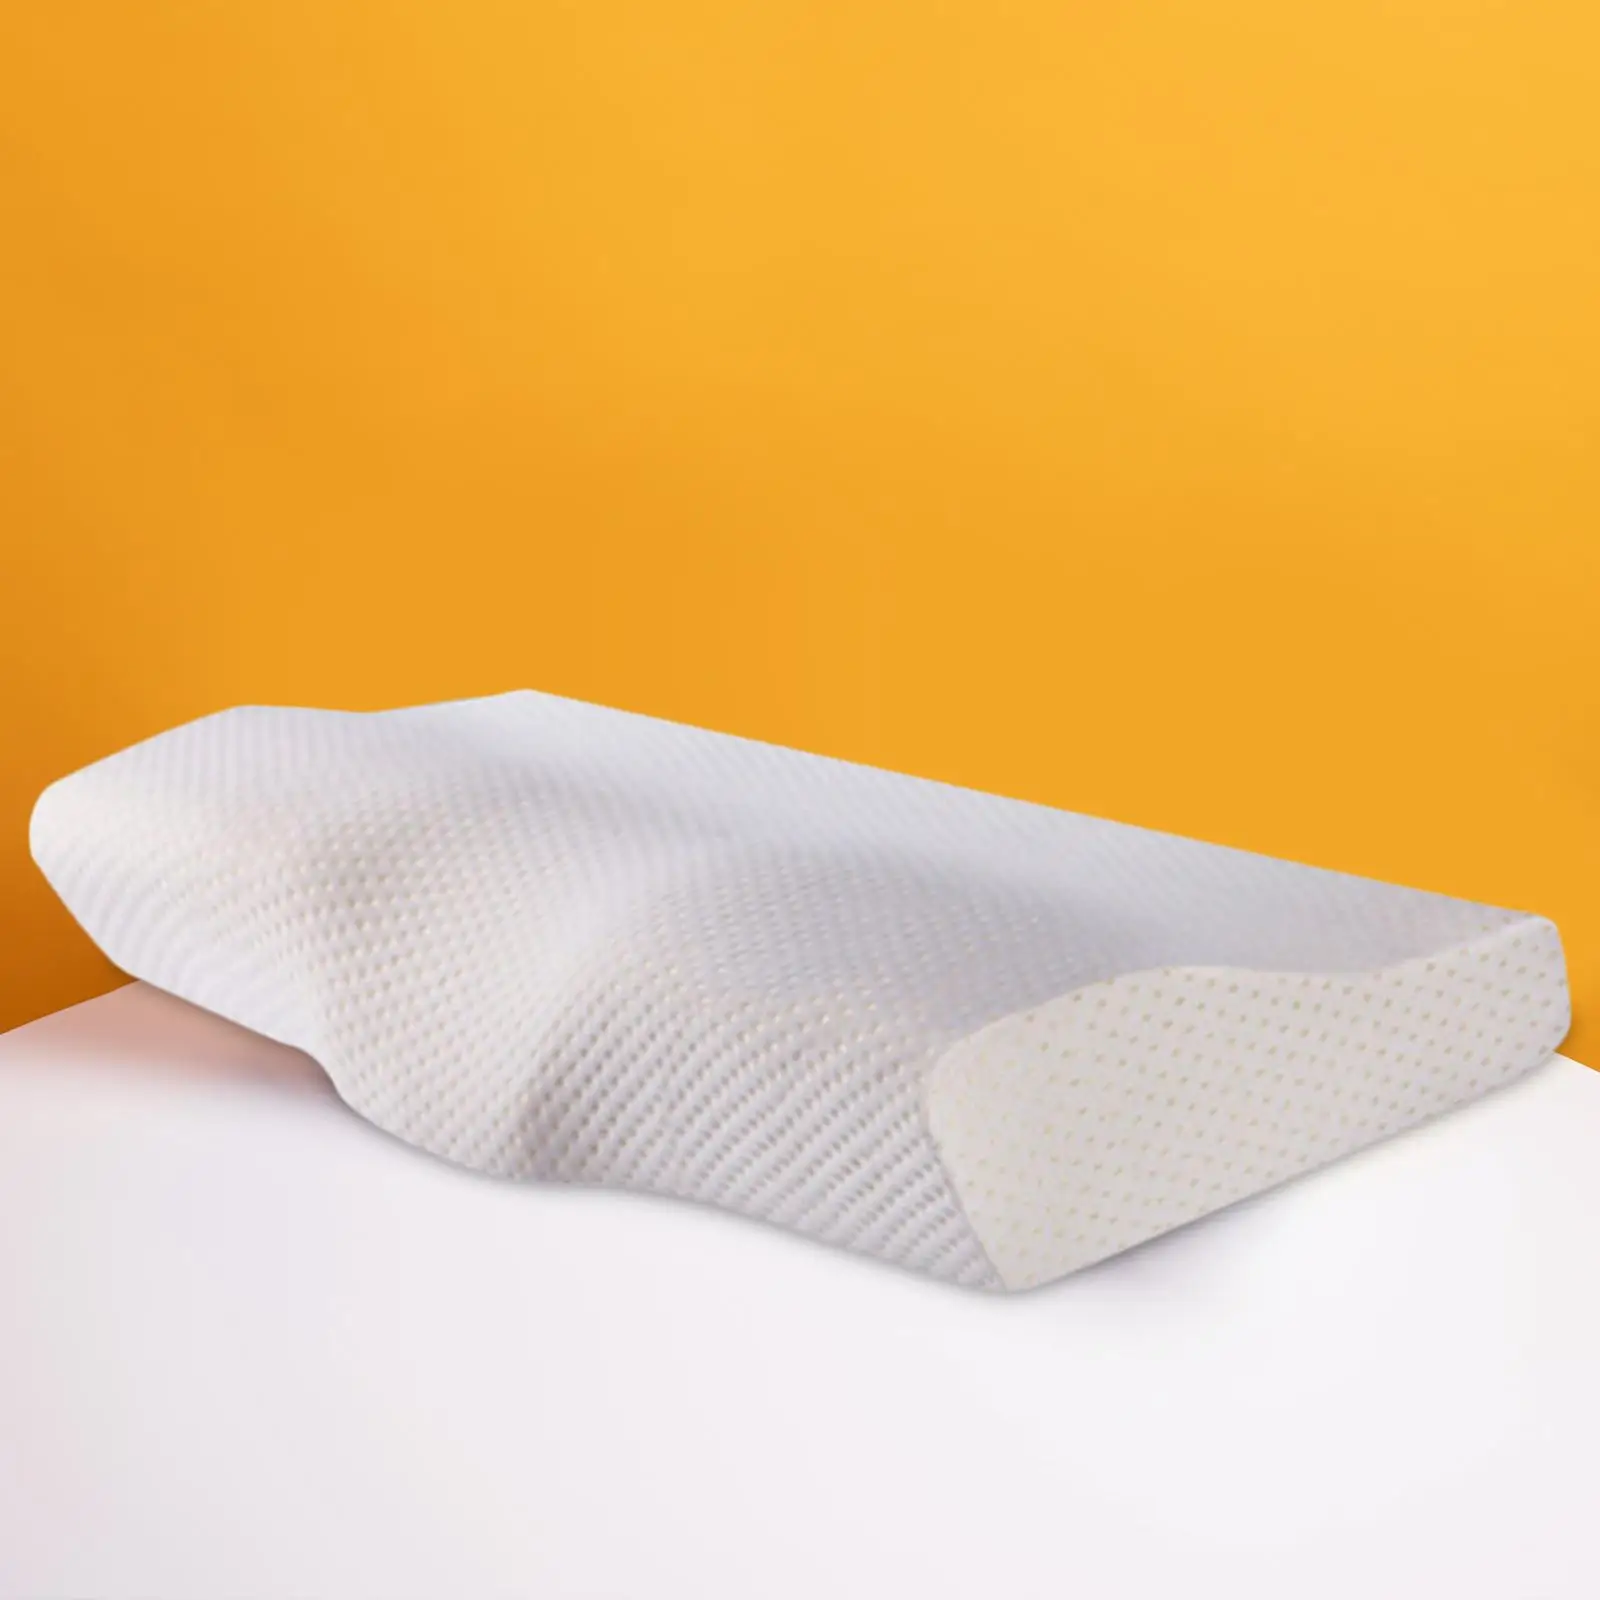 Ergonomic Memory Foam Pillow No Deforming for Side,Back and Stomach Sleepers